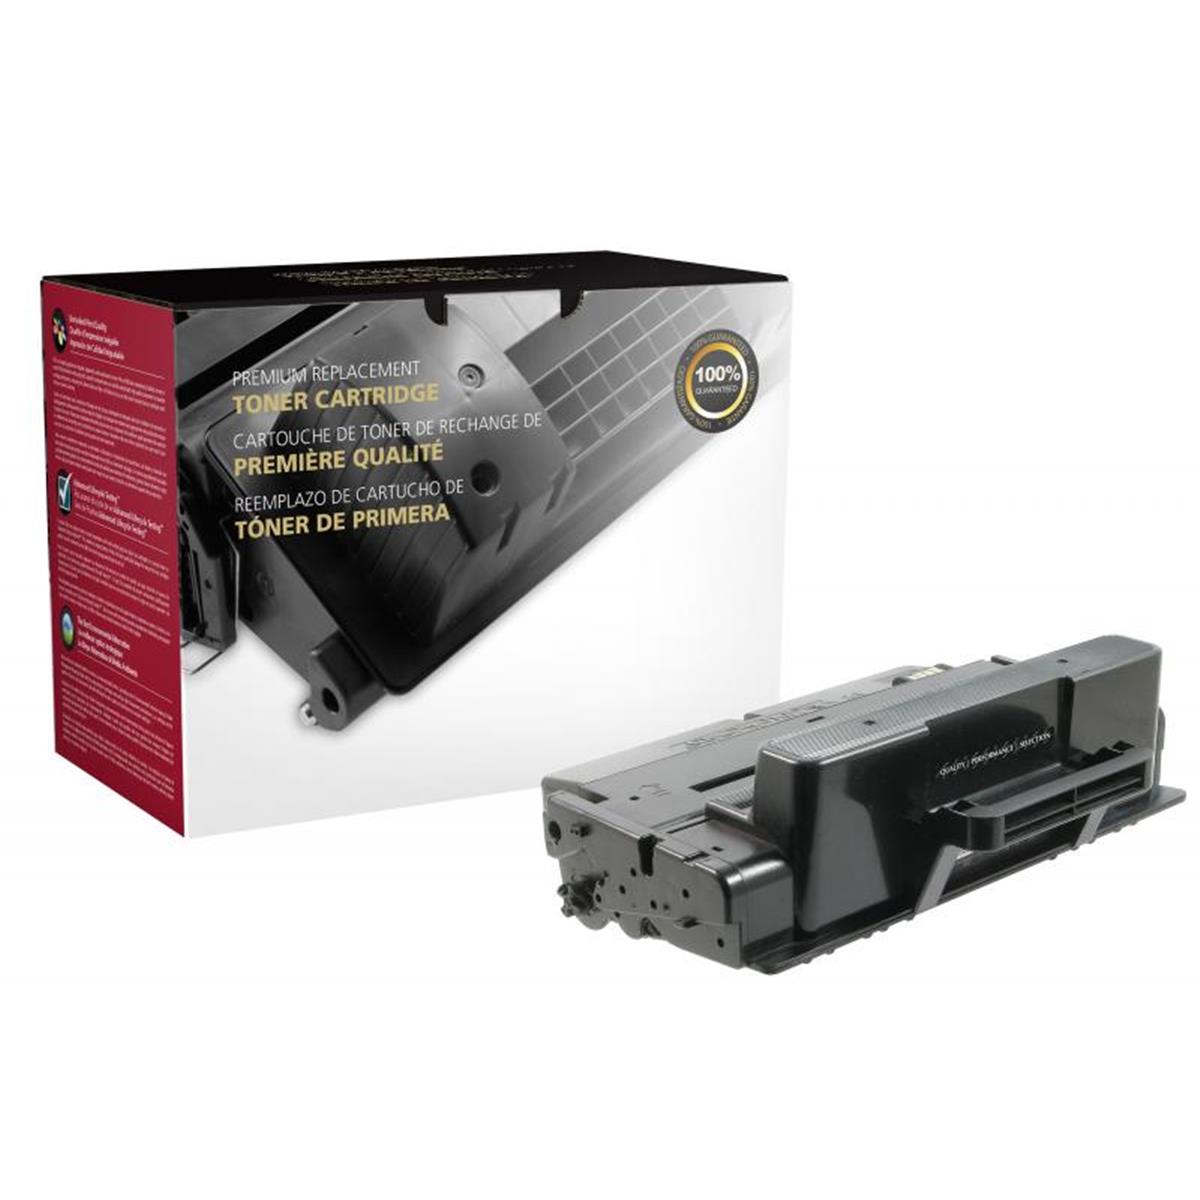 Picture of Dell 200715 High Yield Toner Cartridge for Dell B2375